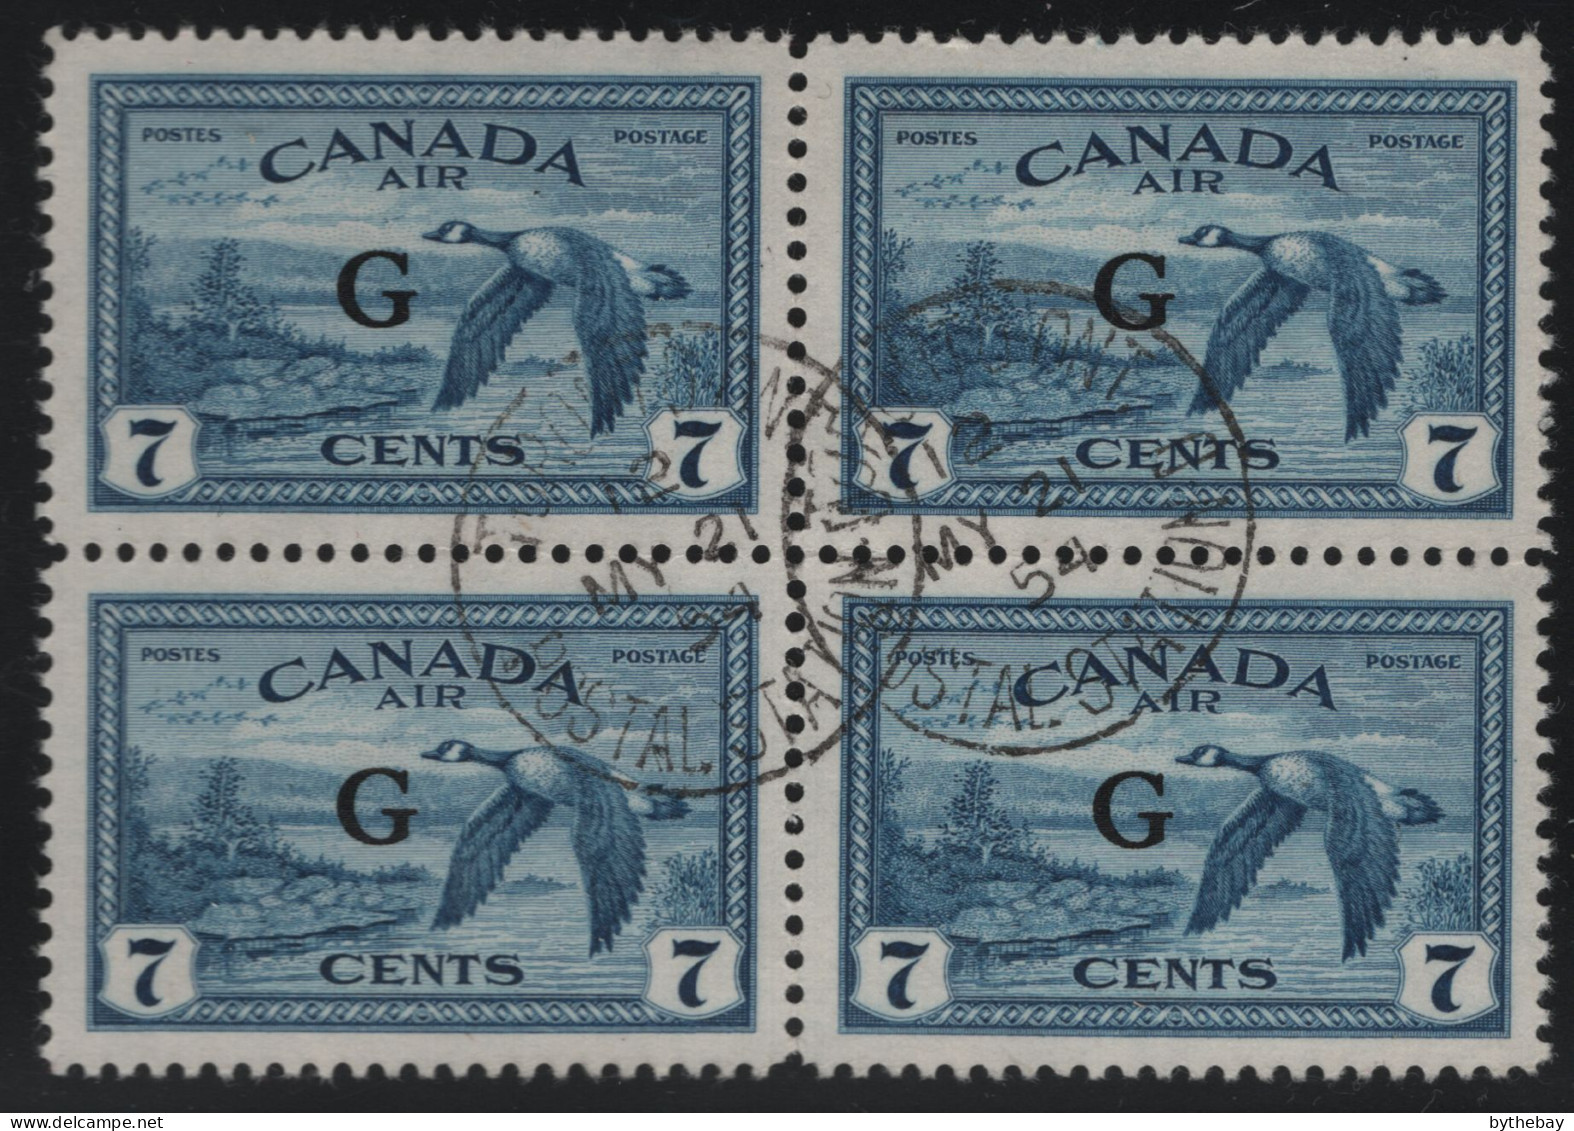 Canada 1950 Used Sc CO2 7c Canada Goose With G Overprint Block Of 4 CDS MY 21 54 - Overprinted